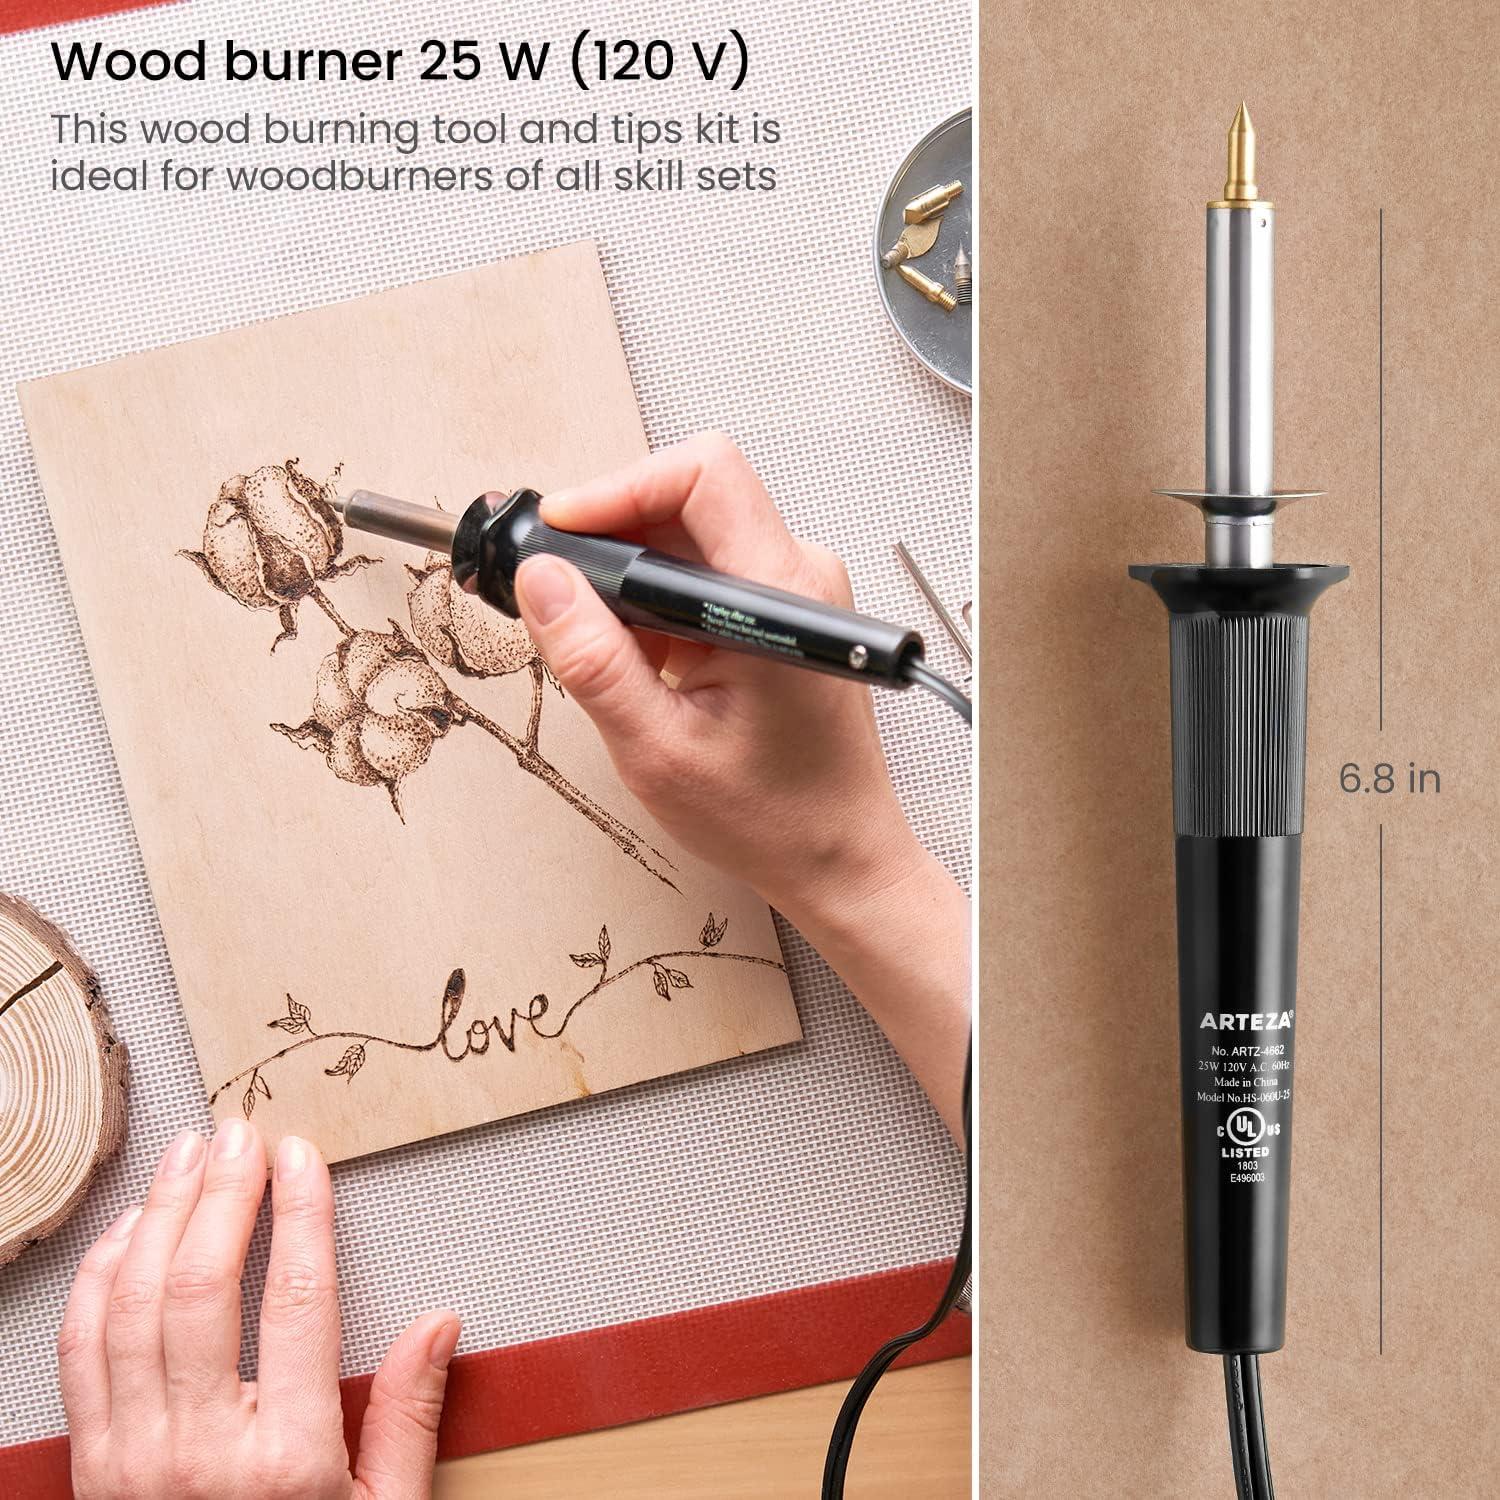 Arteza Wood Burning Kit, 1 Pyrography Pen, 6 Interchangeable Tips, 300400C,  25W, Heat Shield and Stand, for Beginners, Intermediates, and Hobbyists